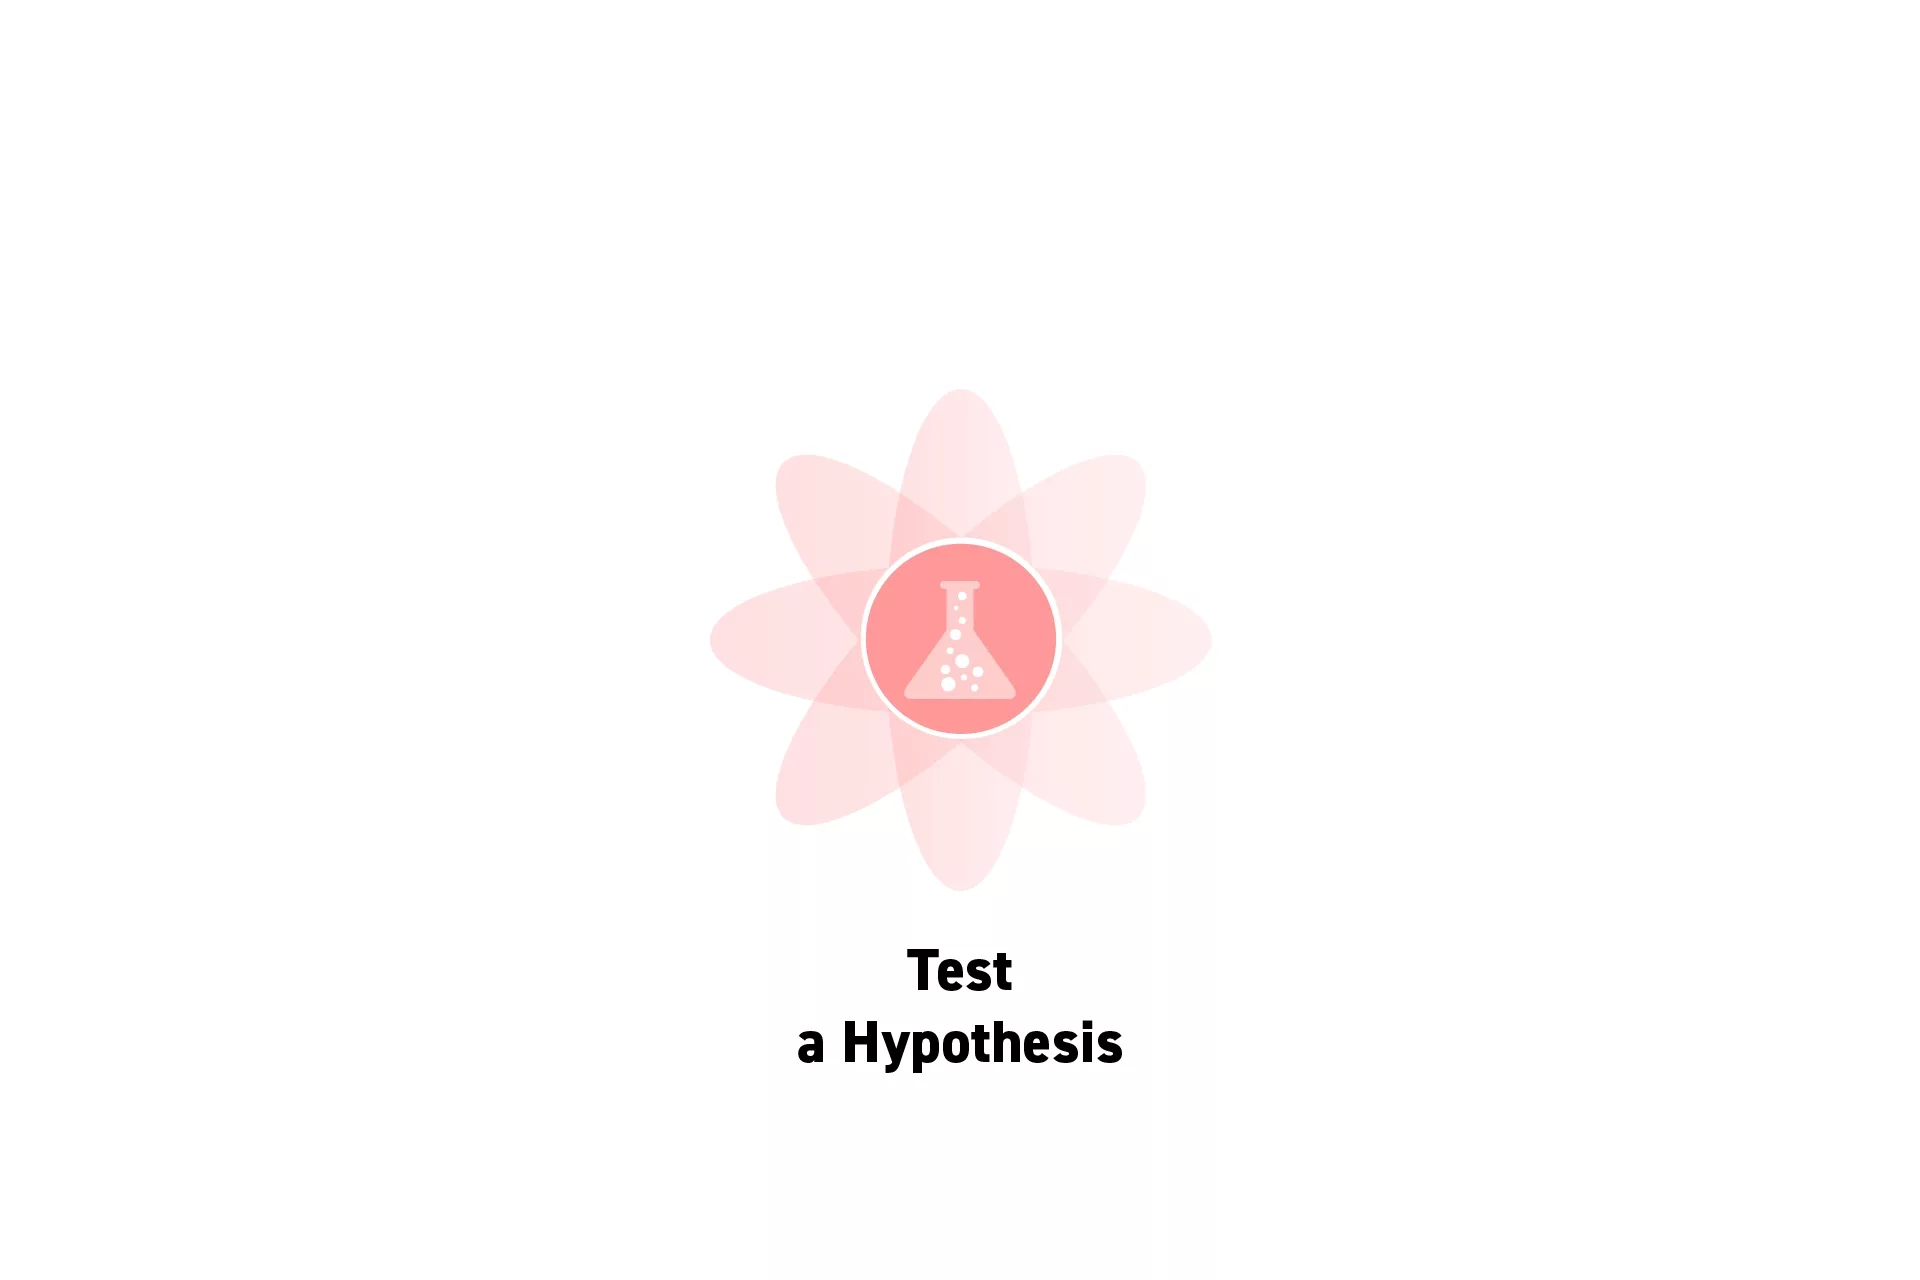 A flower that represents Strategy with the text "Test a Hypothesis" beneath it.